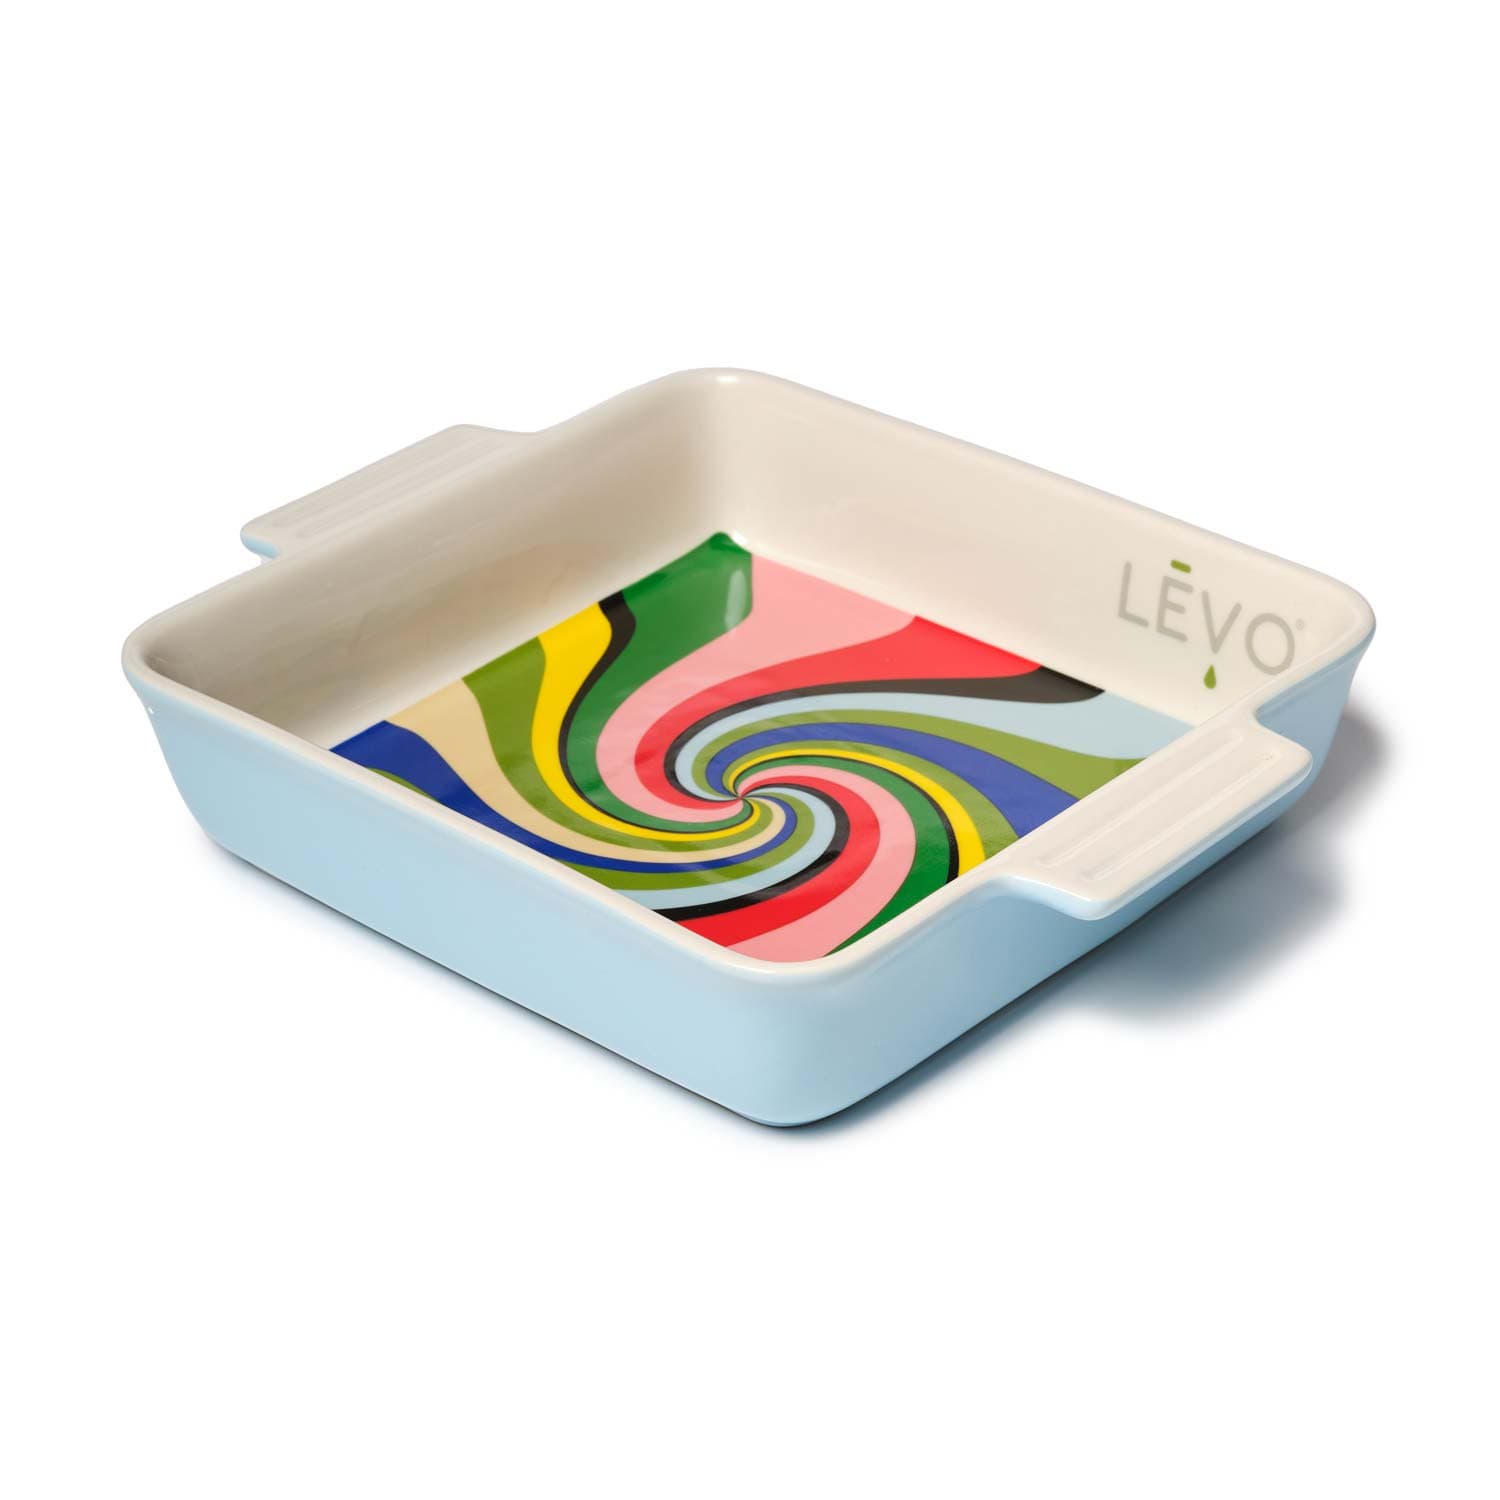 LEVO Porcelain Baking Dish with multicolor swirl decal and logo